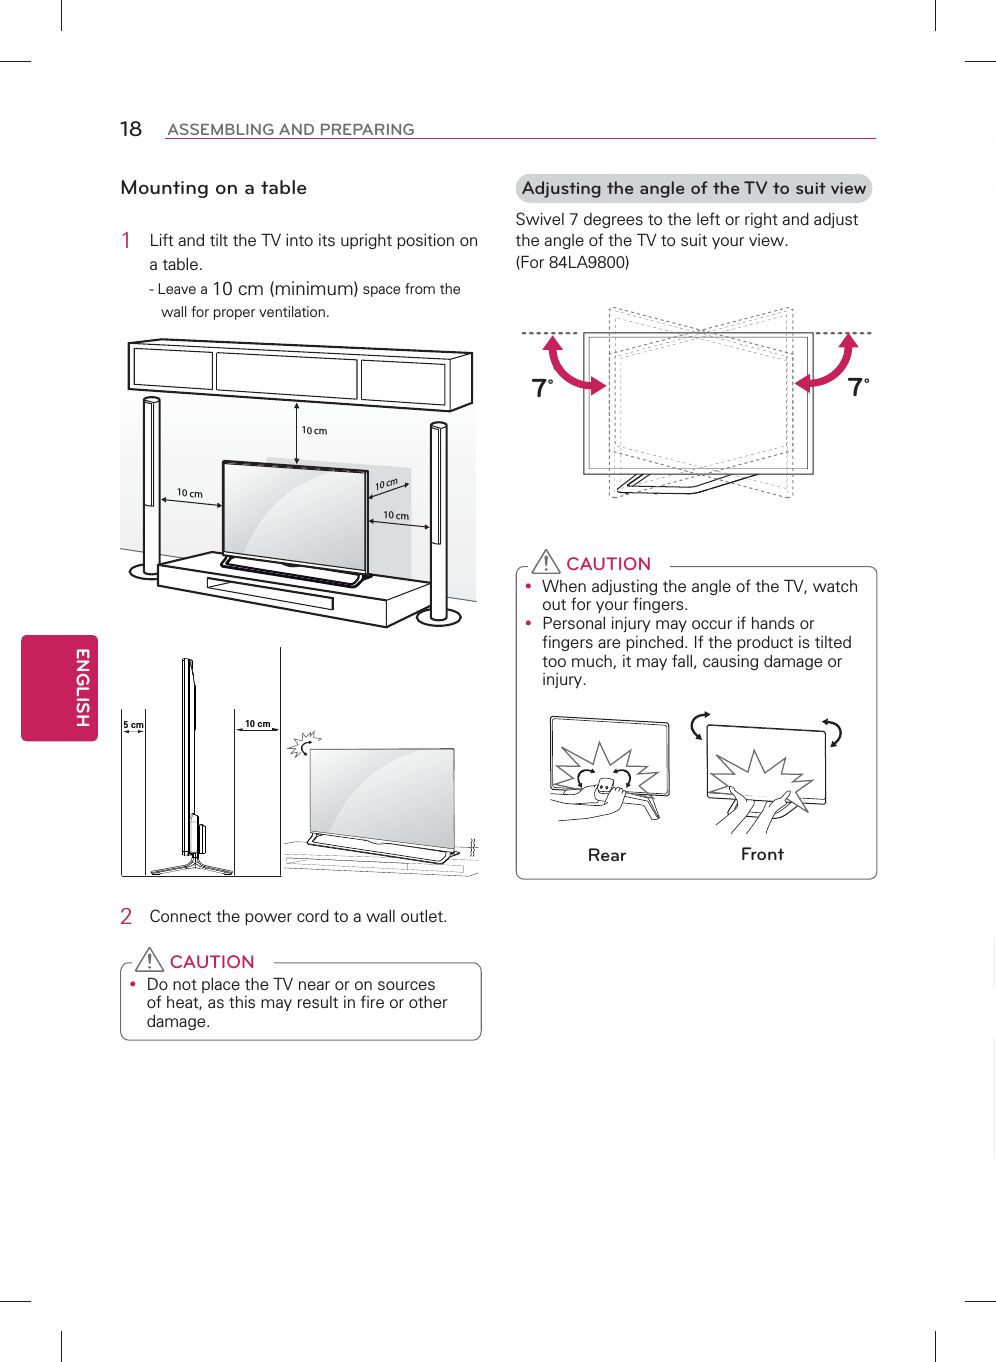 ENGLISH18 ASSEMBLING AND PREPARINGMounting on a table1  Lift and tilt the TV into its upright position on a table.- Leave a 10 cm (minimum) space from the wall for proper ventilation.10 cm10 cm10 cm10 cm5 cm 10 cm2  Connect the power cord to a wall outlet.y Do not place the TV near or on sources of heat, as this may result in fire or other damage. CAUTIONAdjusting the angle of the TV to suit viewSwivel 7 degrees to the left or right and adjust the angle of the TV to suit your view. (For 84LA9800)        7˚7˚y When adjusting the angle of the TV, watch out for your fingers.y Personal injury may occur if hands or fingers are pinched. If the product is tilted too much, it may fall, causing damage or injury.Rear Front CAUTION